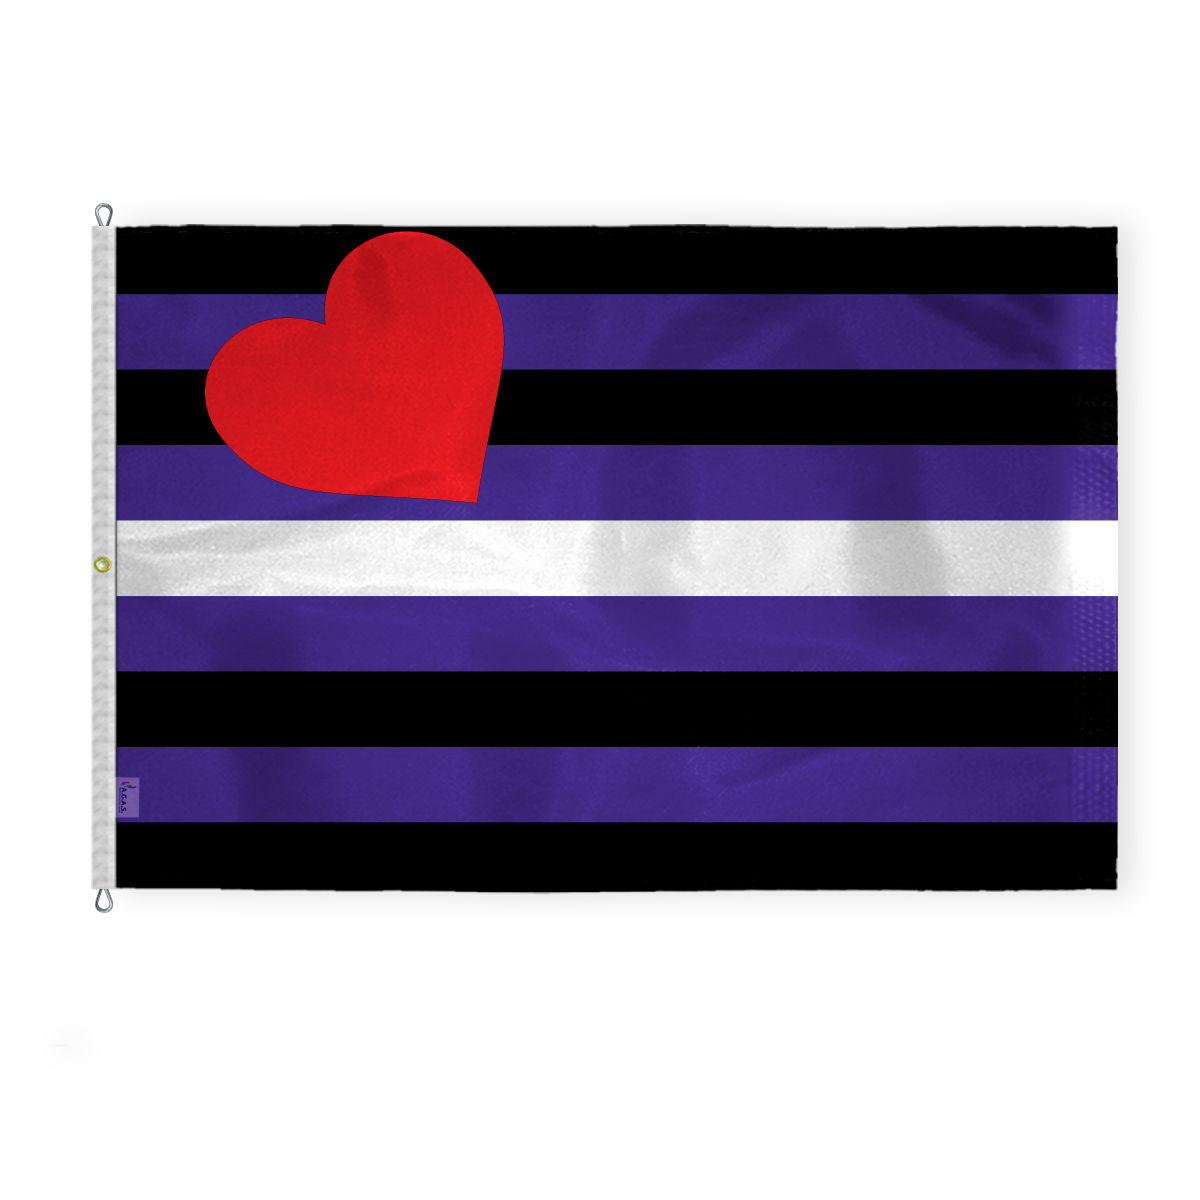 AGAS Leather Pride Flag 8x12 ft - Printed Single Sided on 200D Nylon